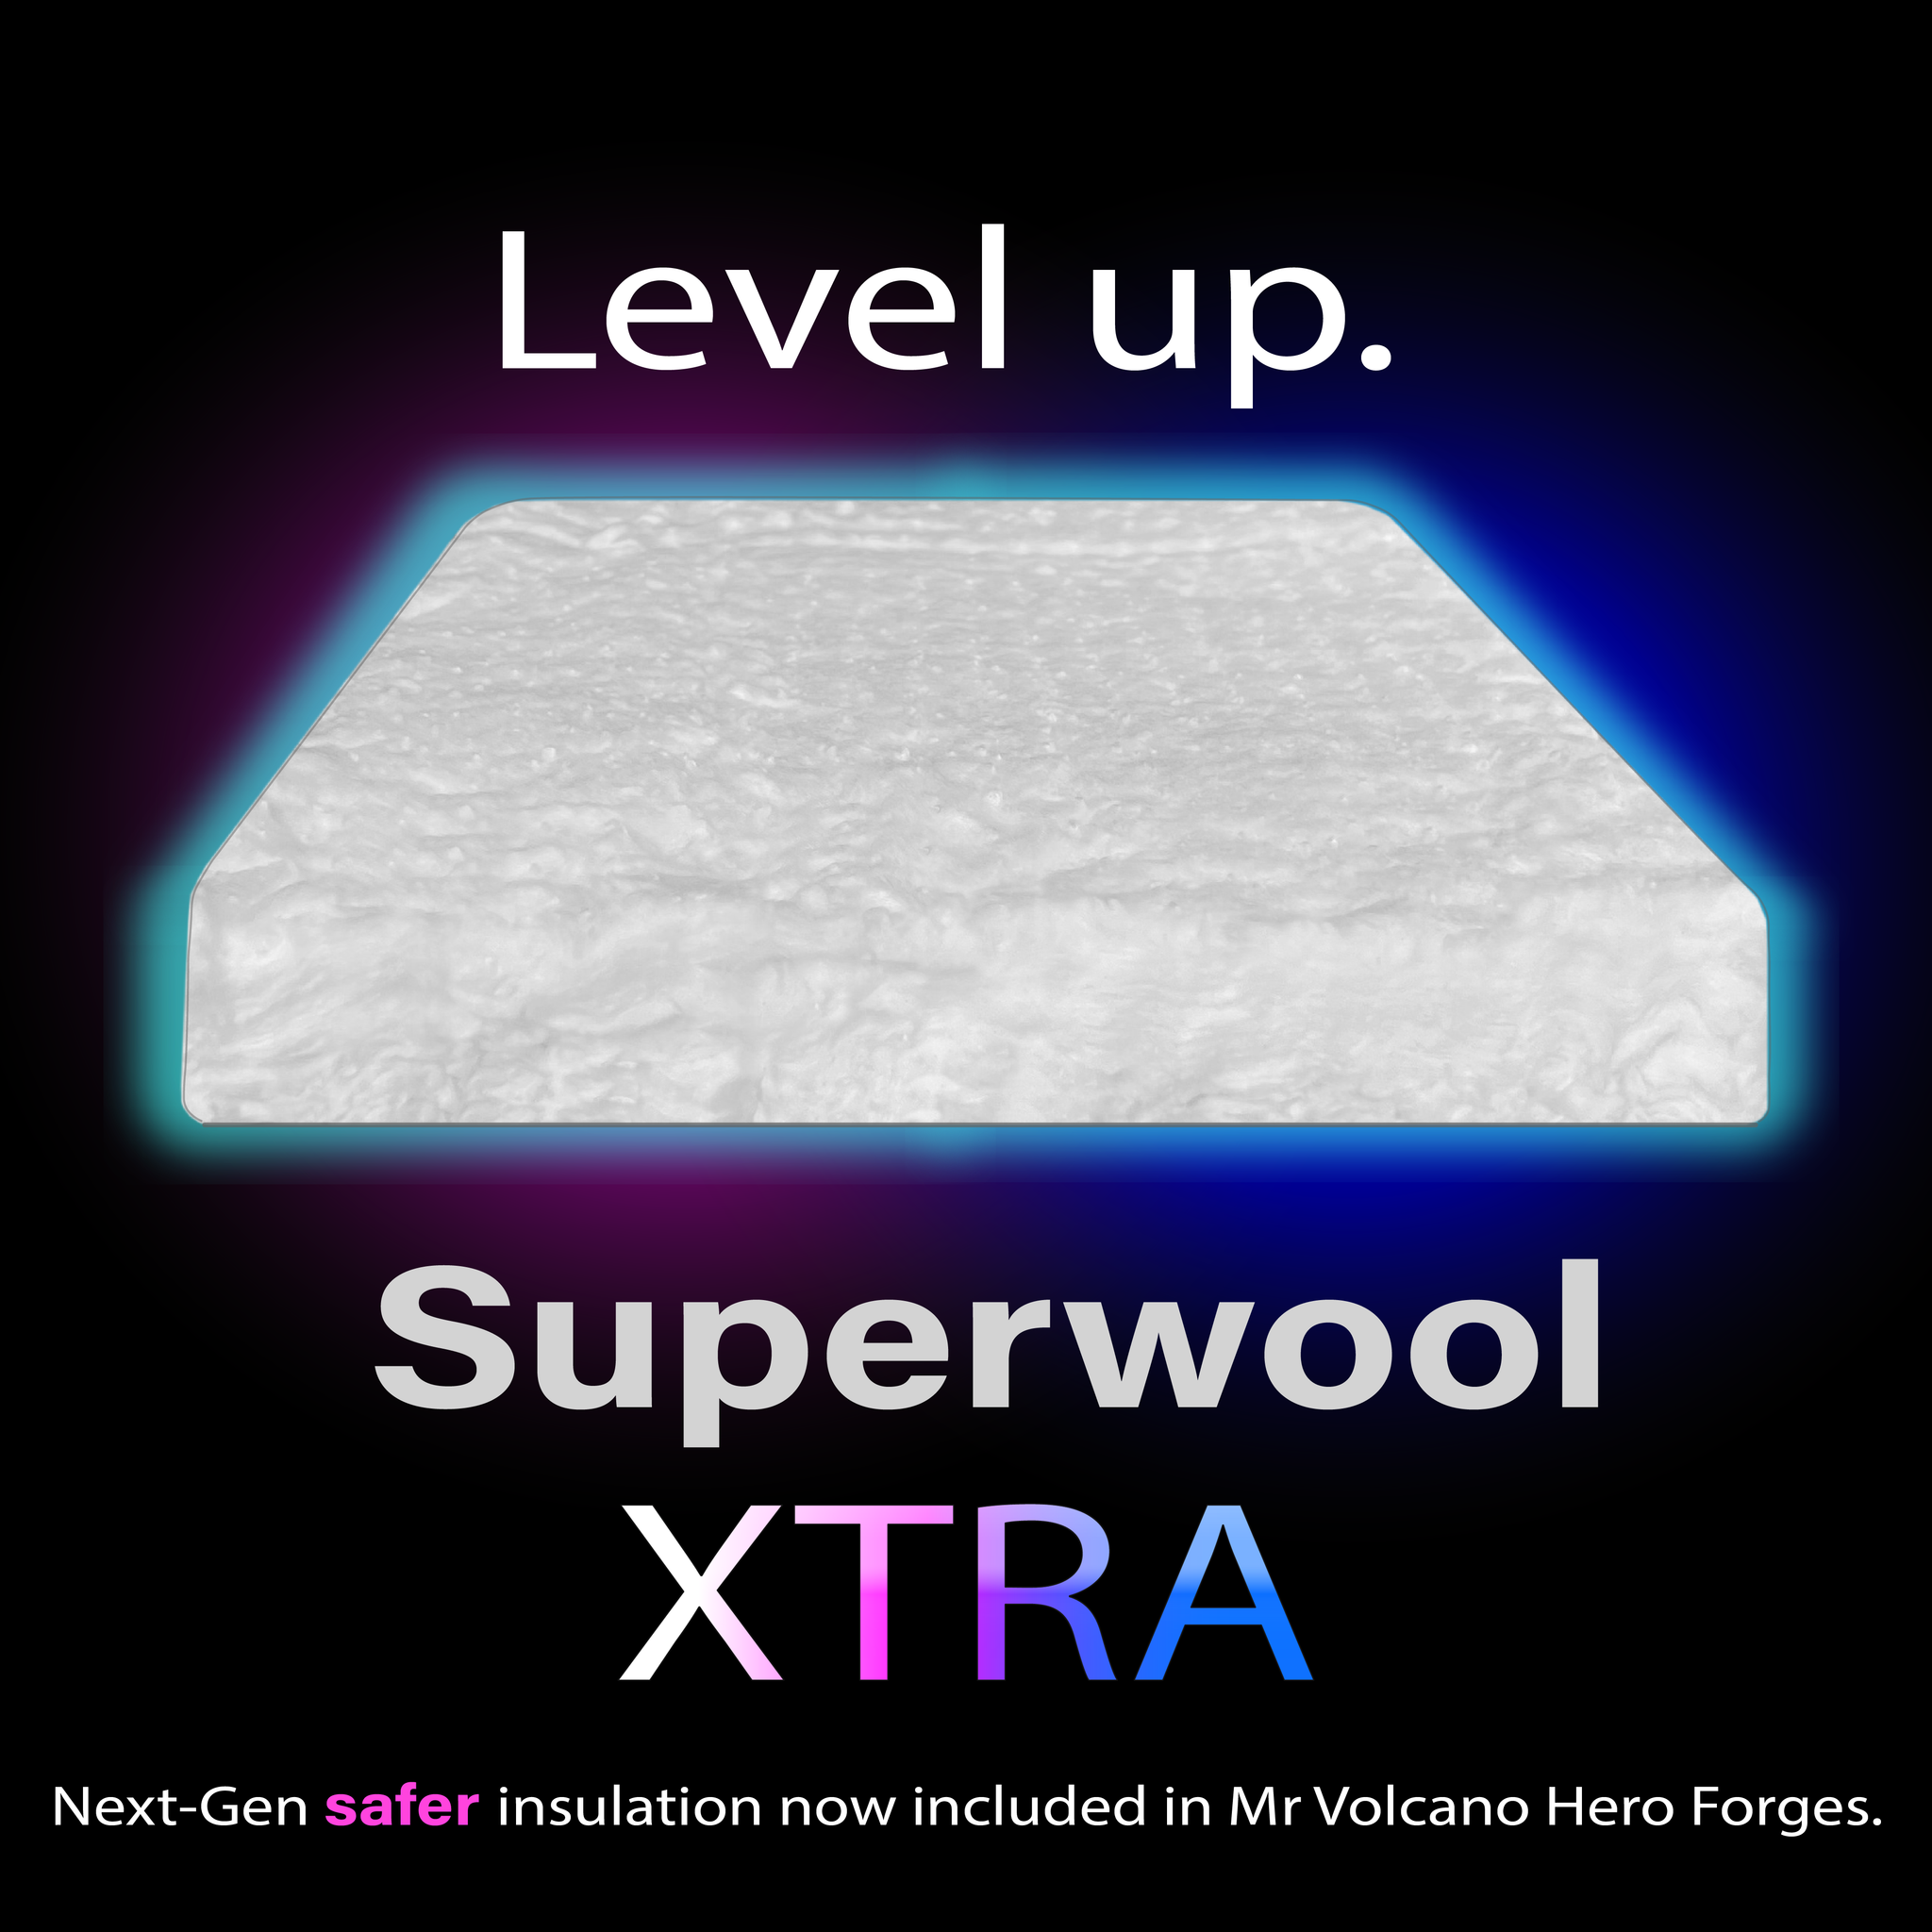 Mr Volcano Insulation Relining Kit for Hero 2 Forge (16 model) Includes:  Superwool XTRA Blanket, 16oz Rigidizer Concentrate, 4 lb Satanite Refractory